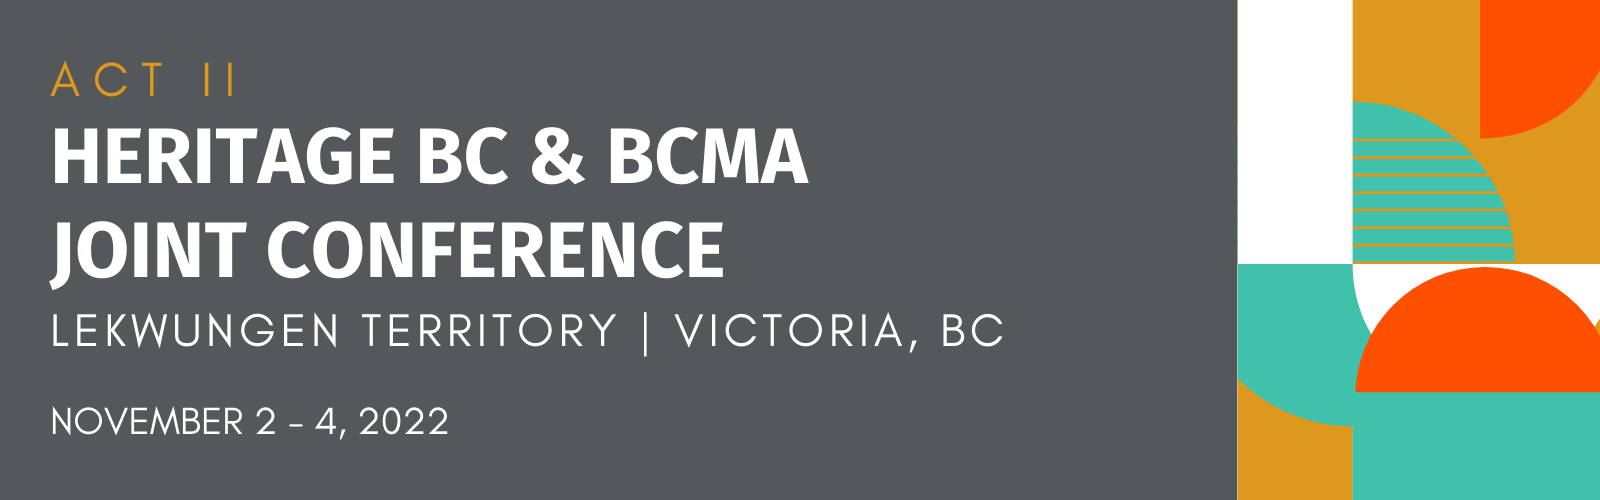 Heritage BC and BCMA Joint Conference Banner